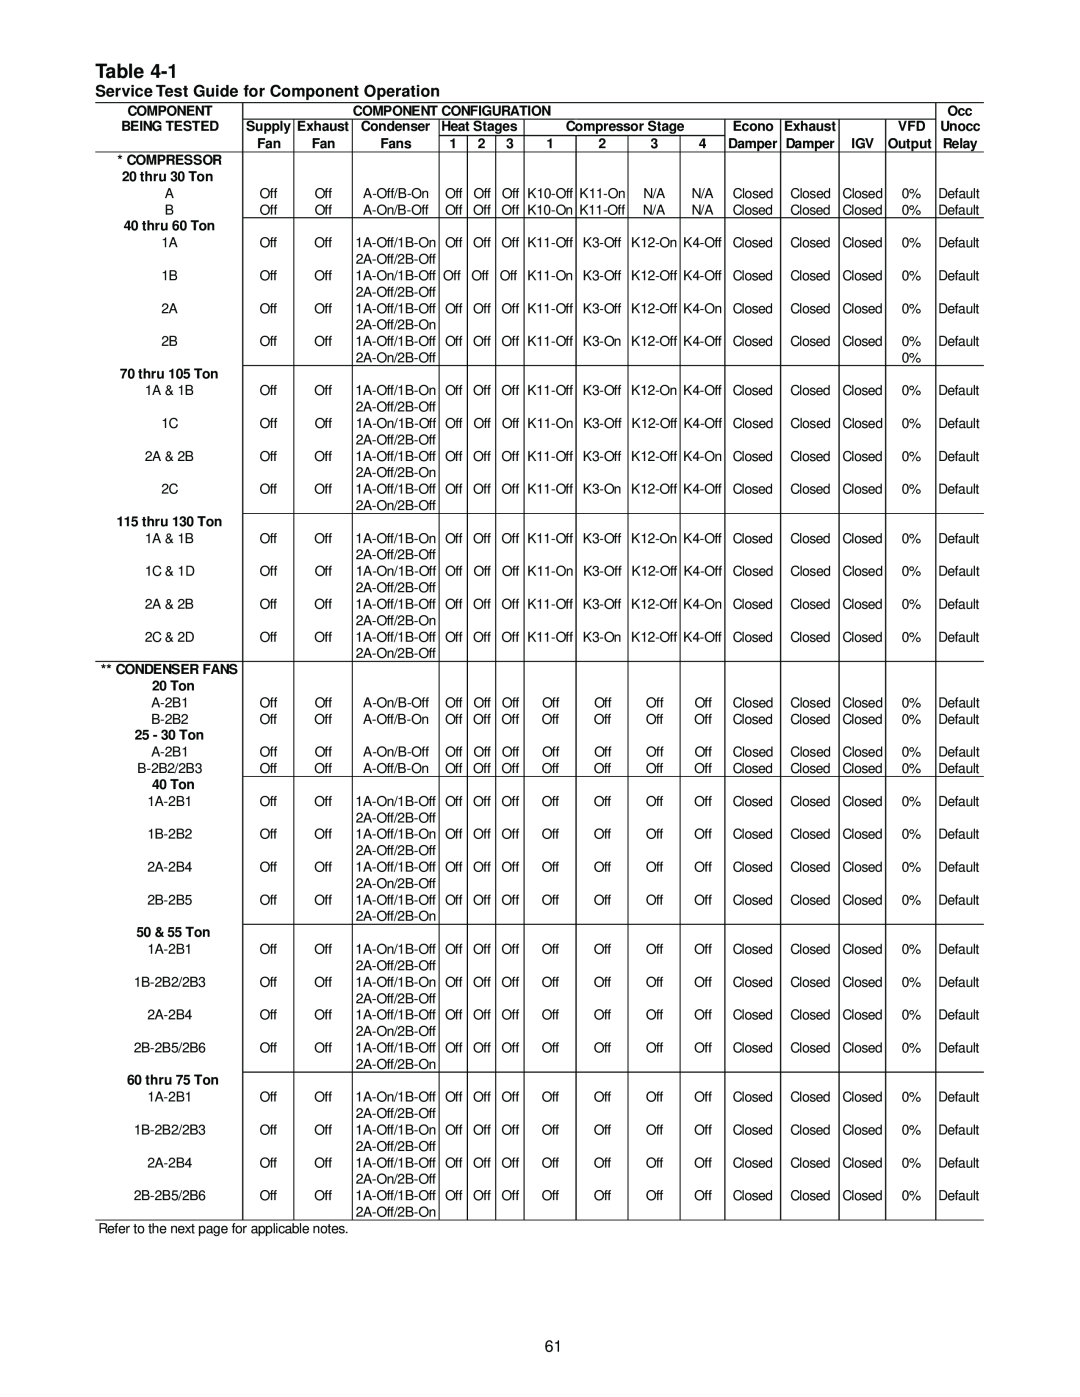 Trane RT-SVX10C-EN specifications Table, Service Test Guide for Component Operation 